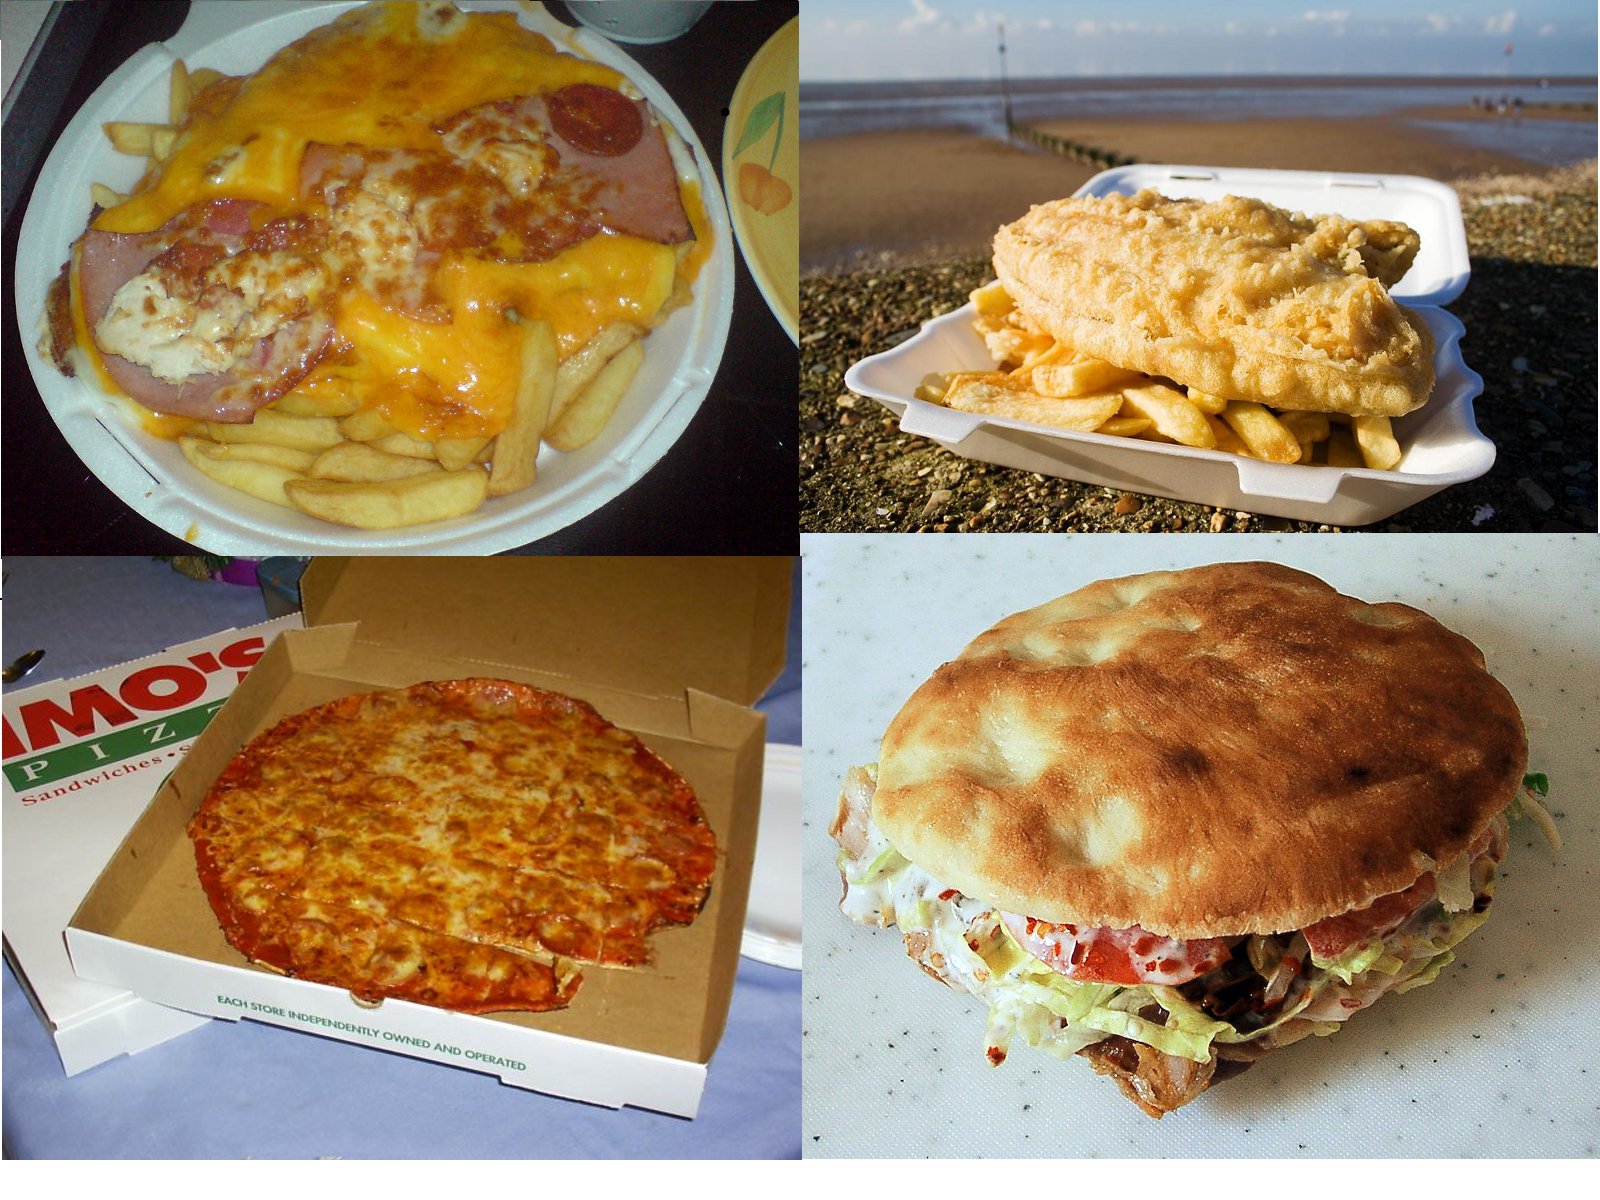 Upper left. A Meat Feast Parmo from Stockton-on-Tees, UK